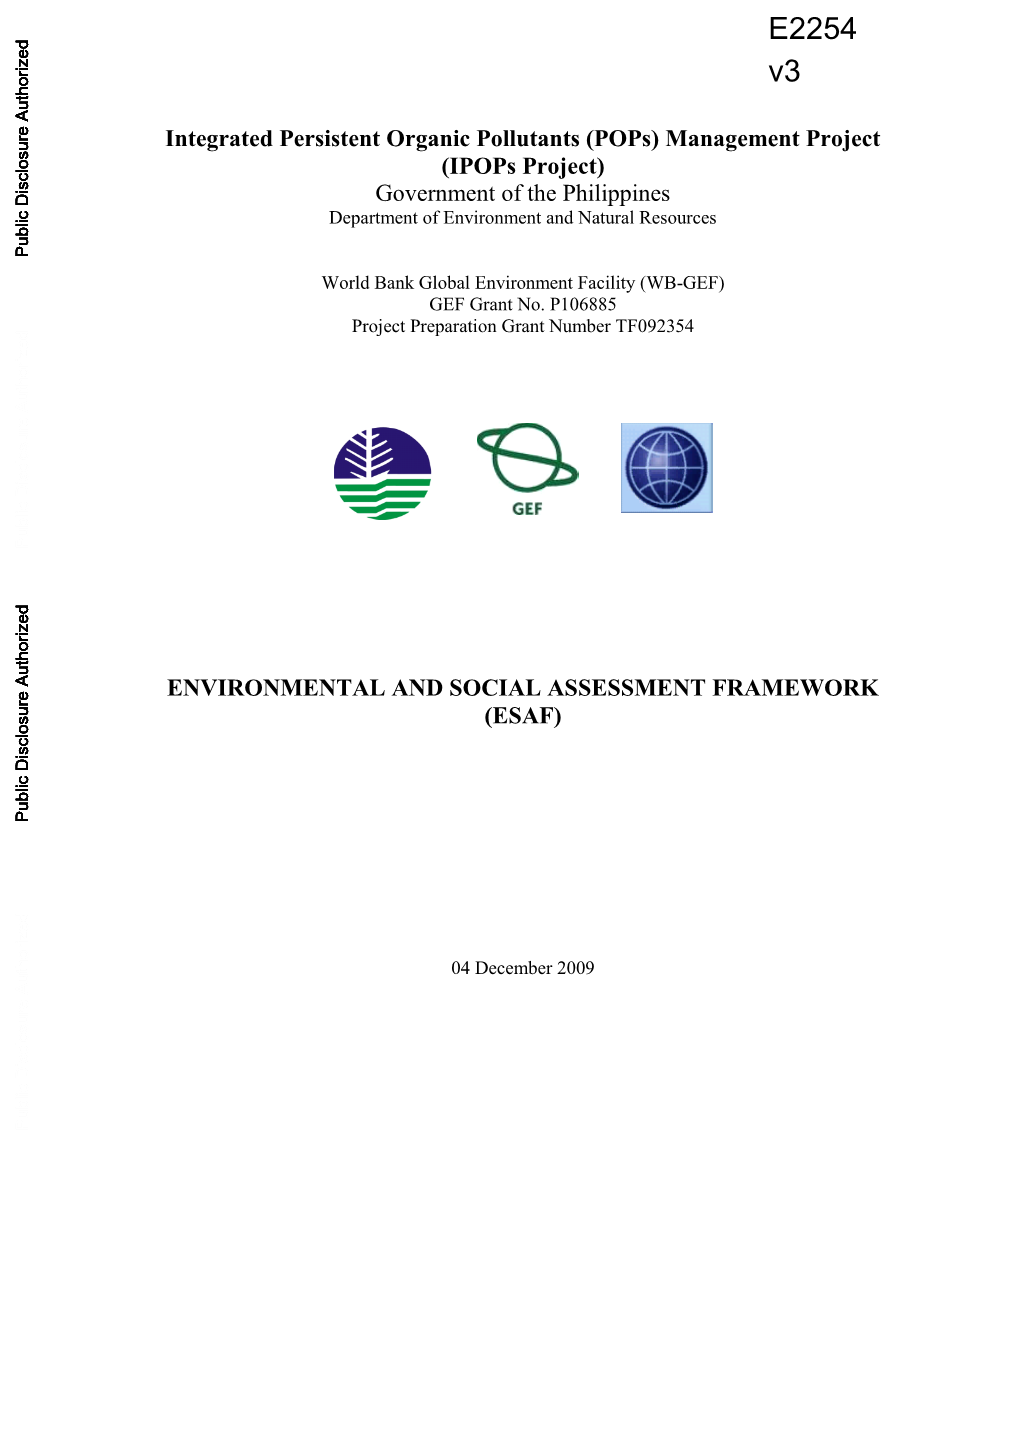 Revised Technical Guidelines Manual on PCB Management for Identification, Labeling, Dismantling, Packaging, Storage, Transport and Disposal of PCB Wastes